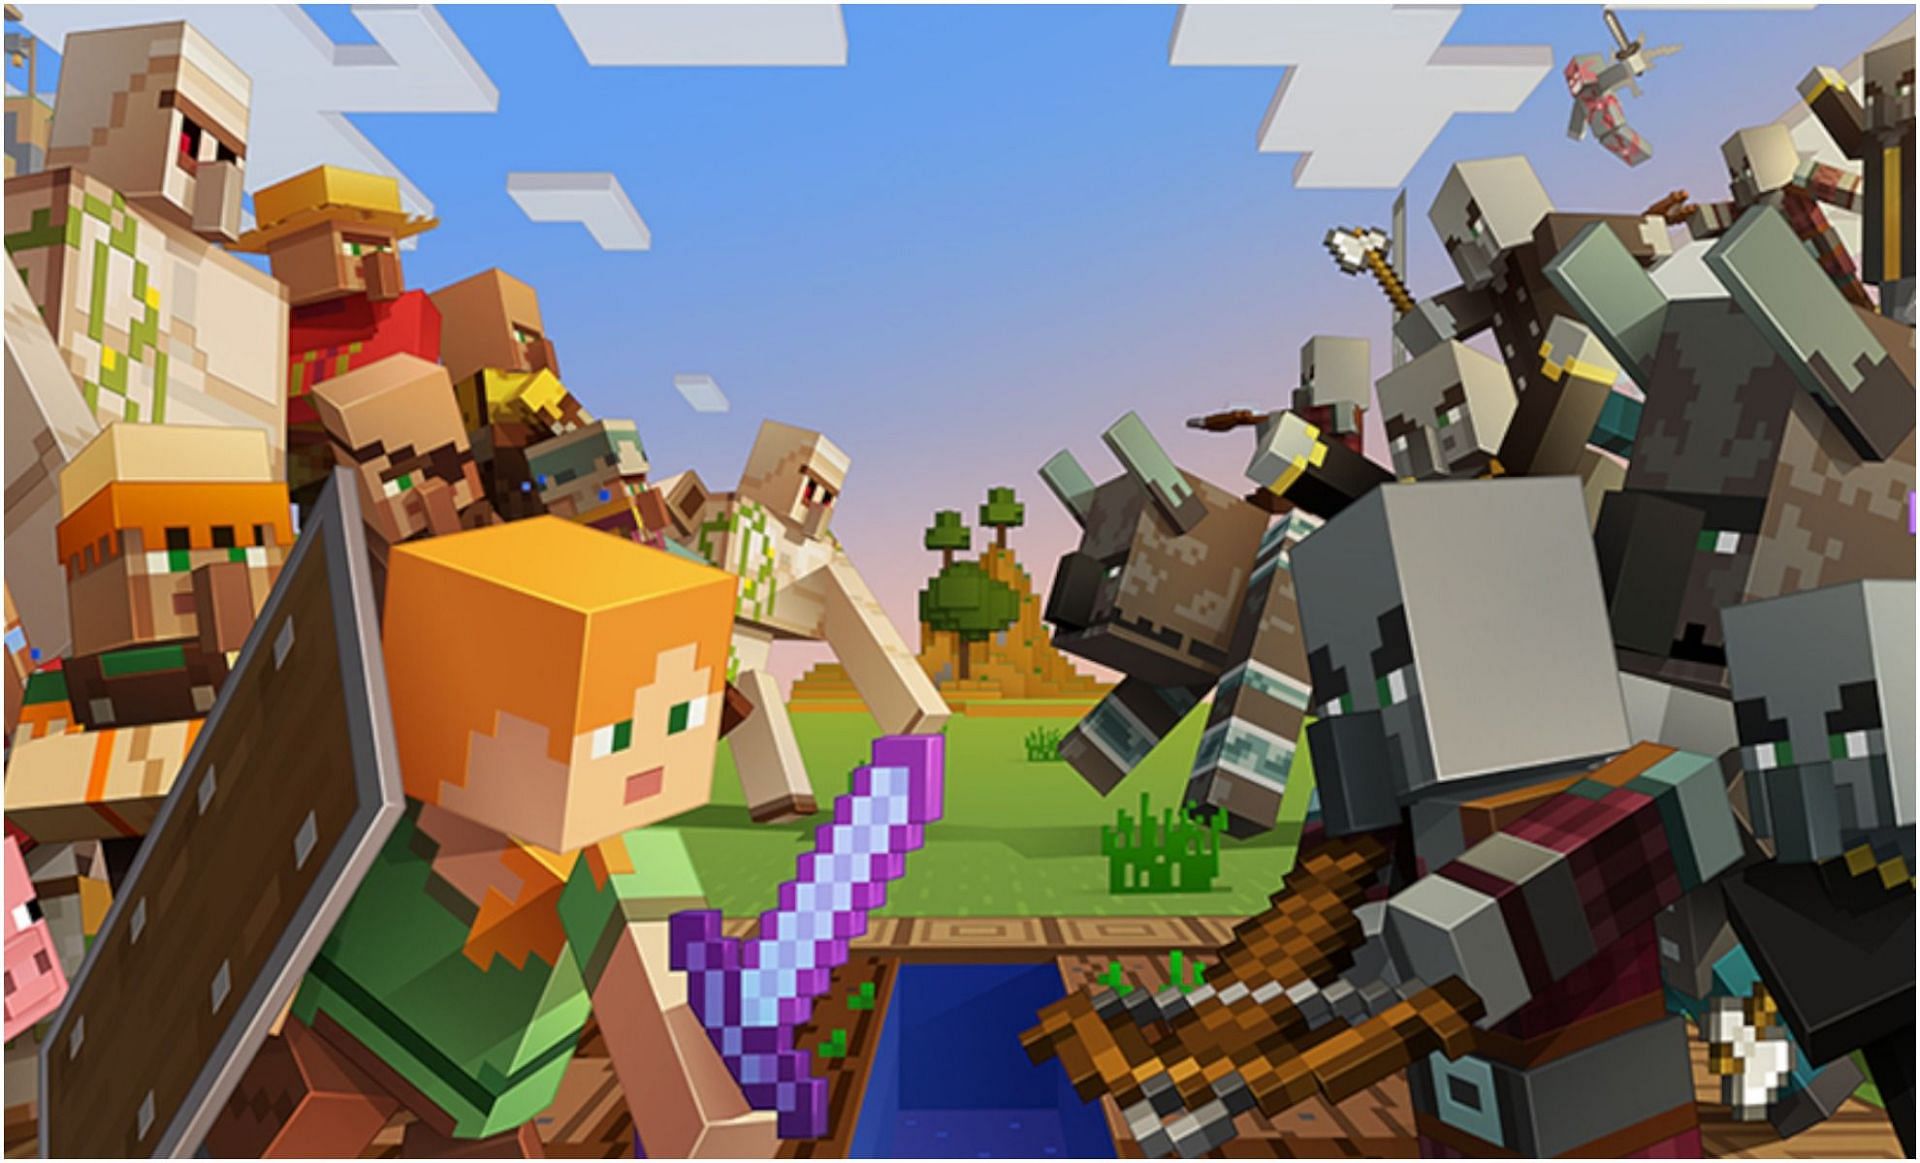 2022 is bringing tons of new content to Minecraft (Image via Minecraft)